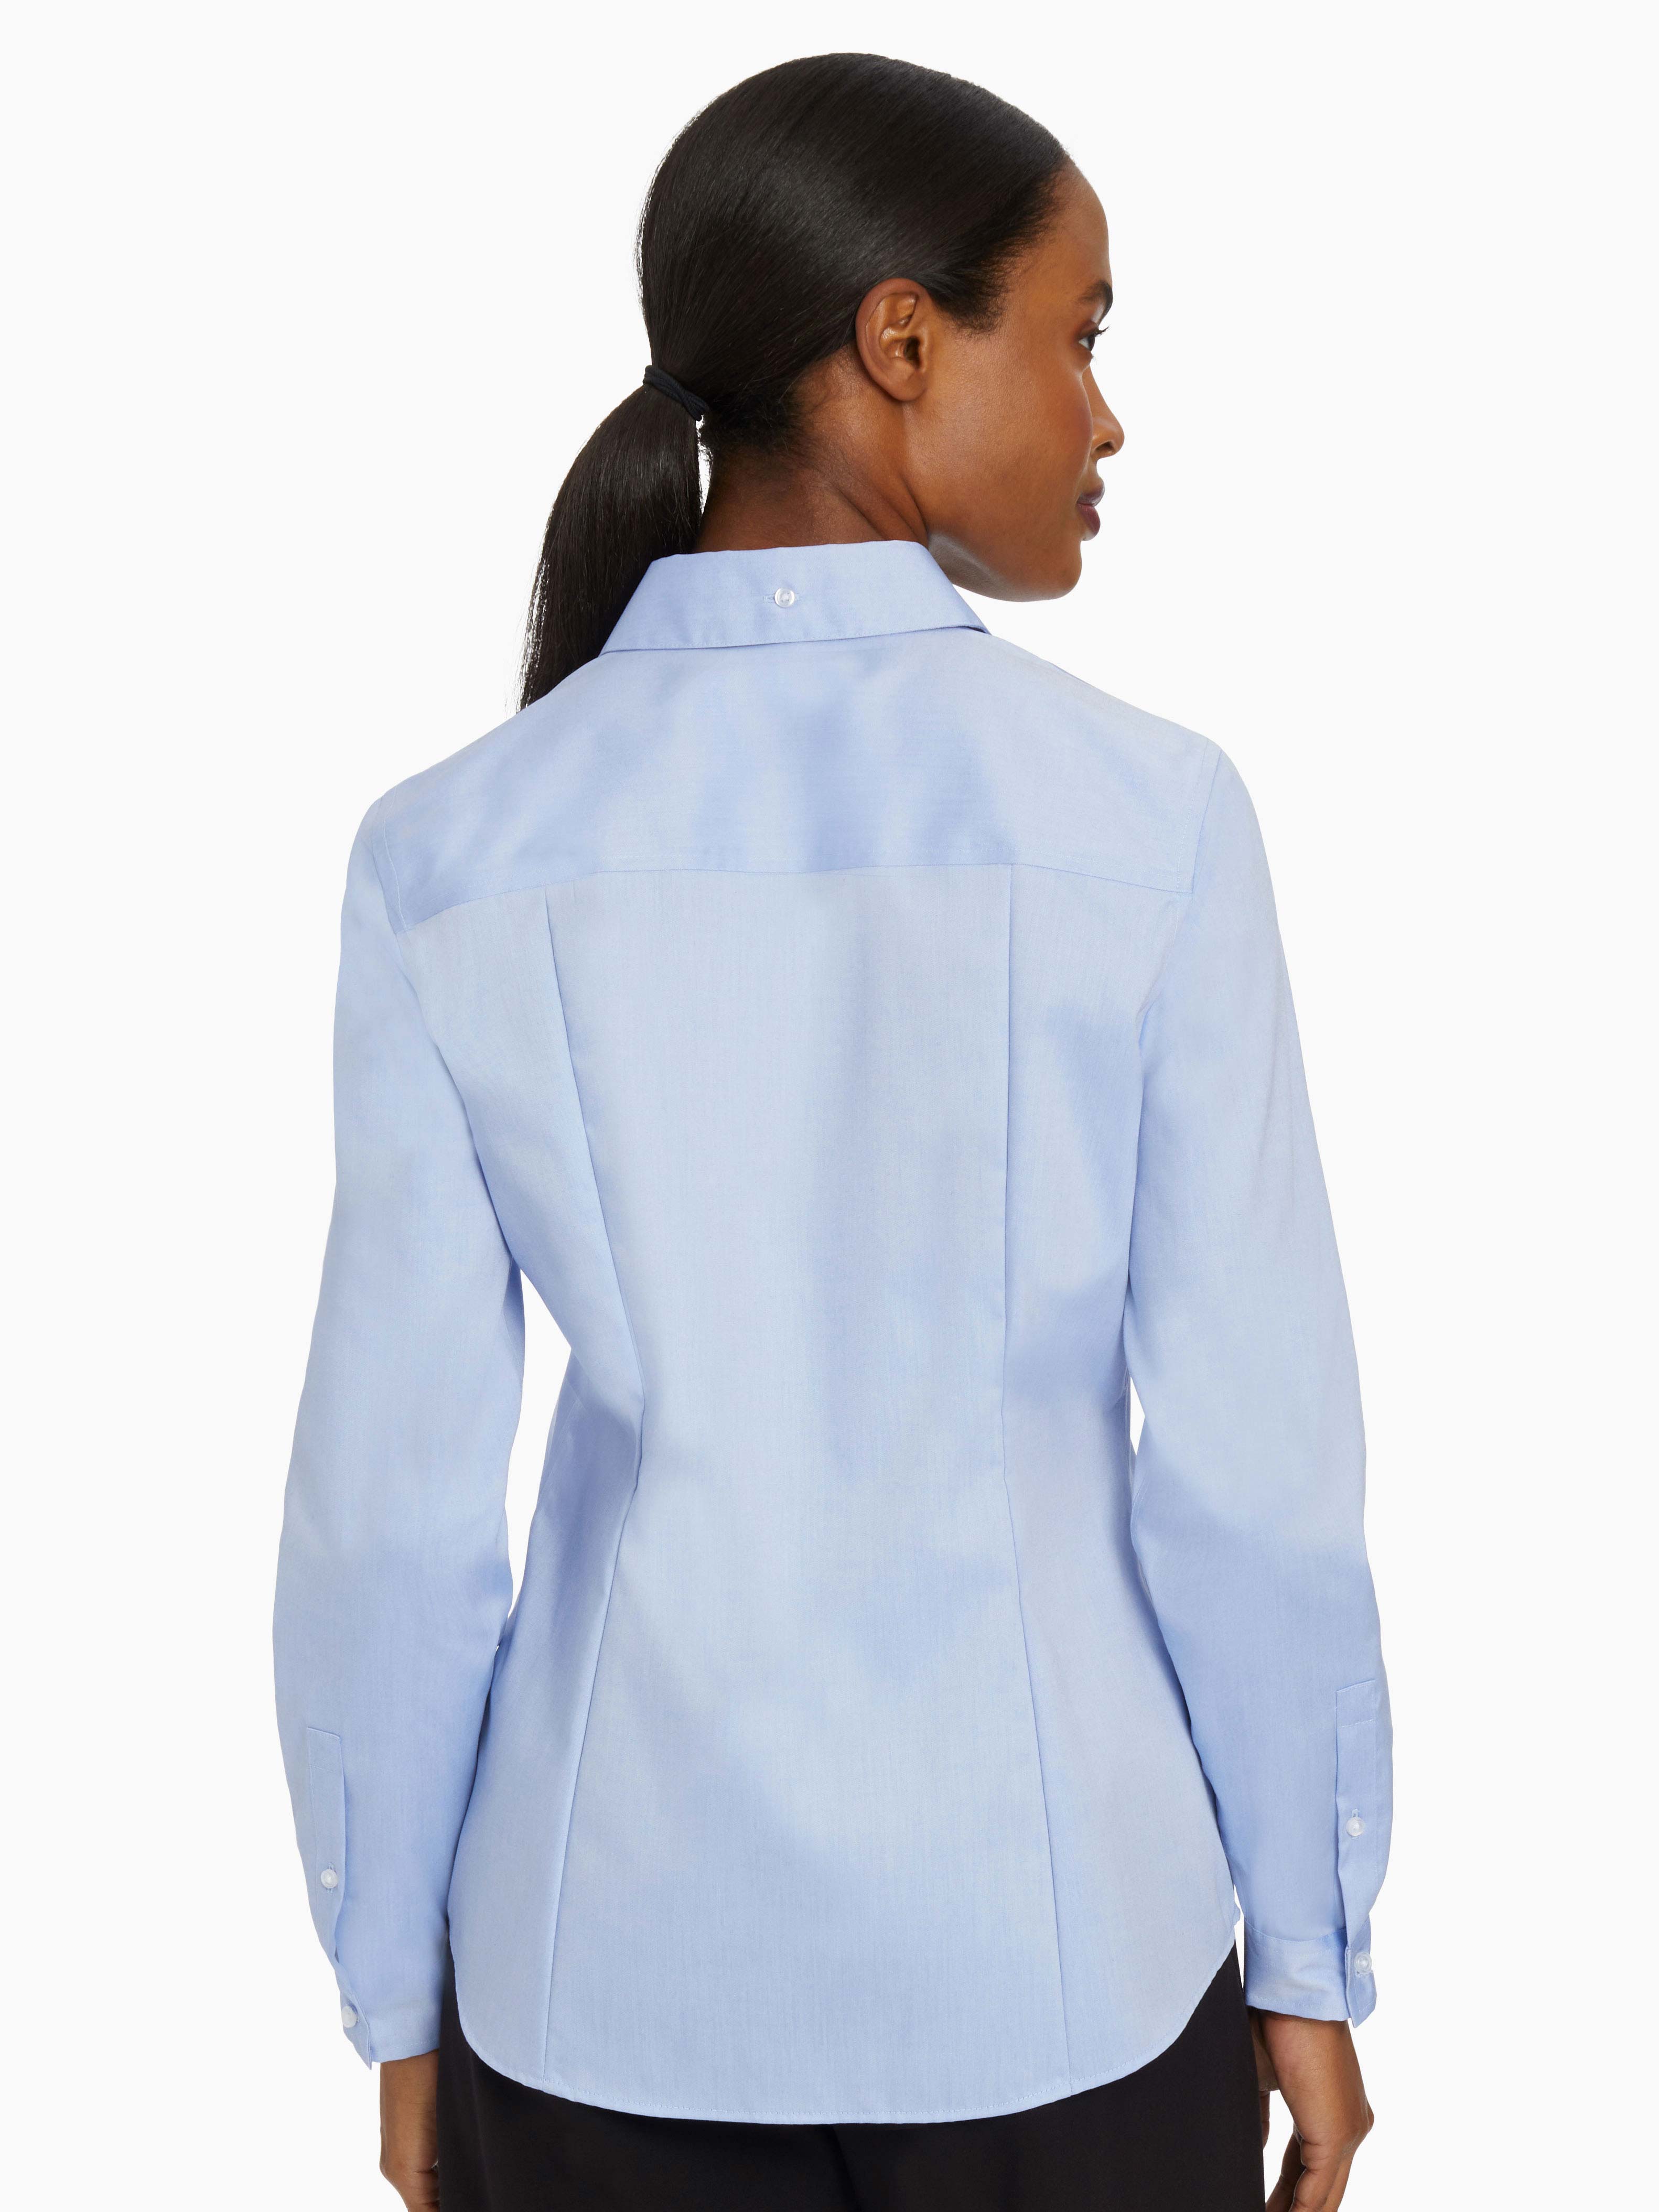 Blue Easy-Care Shirt - Button Front Shirt